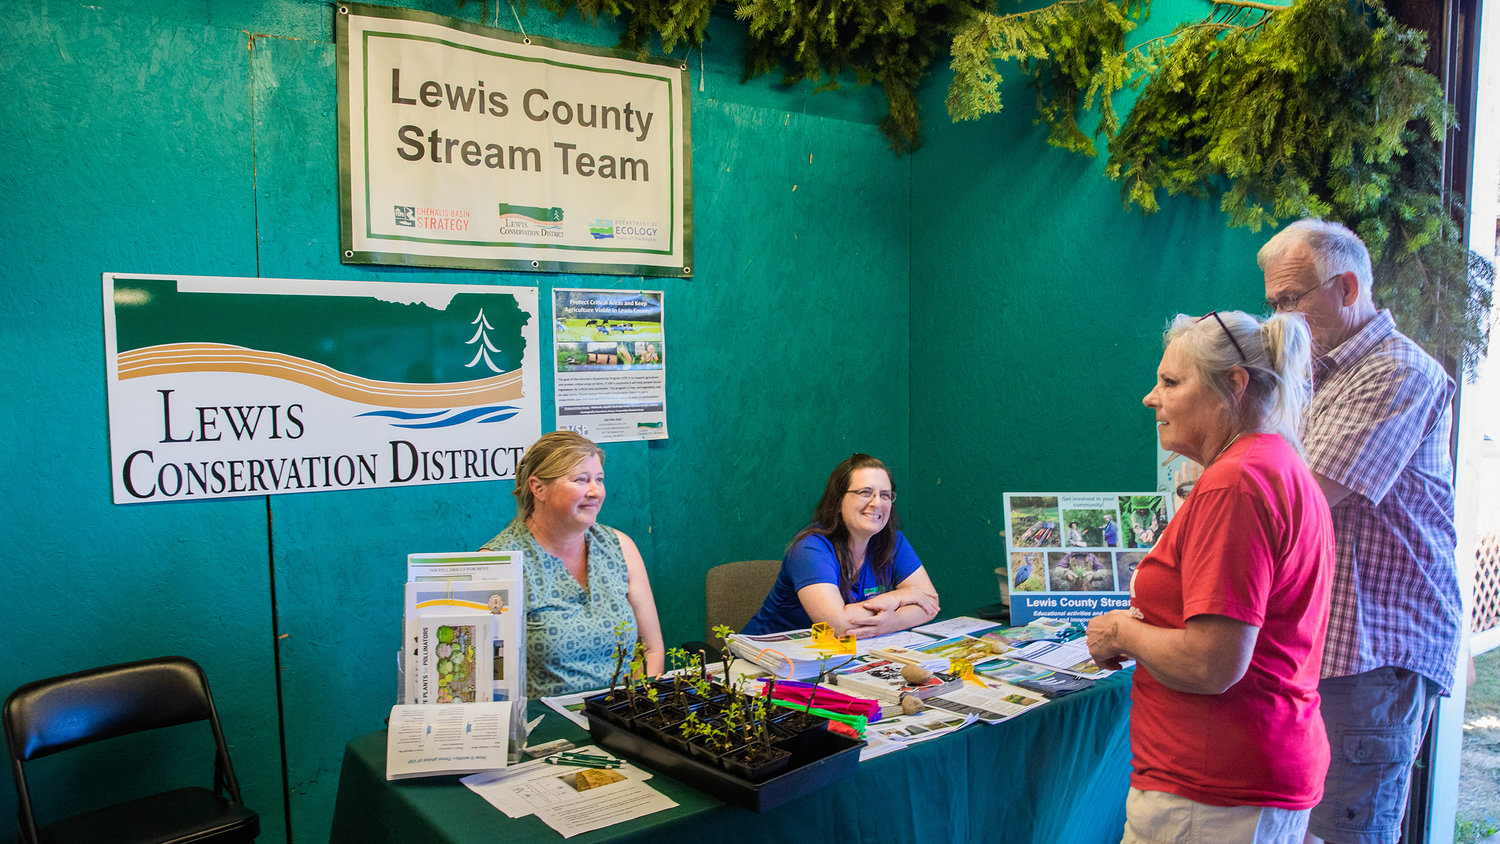 Nikki Atkins, watershed liaison, and Kelly Verd, special projects coordinator for the Conservation District, smile and talk to visitors at their table inside the Wildlife Building at the Southwest Washington Fairgrounds in Centralia on Tuesday.